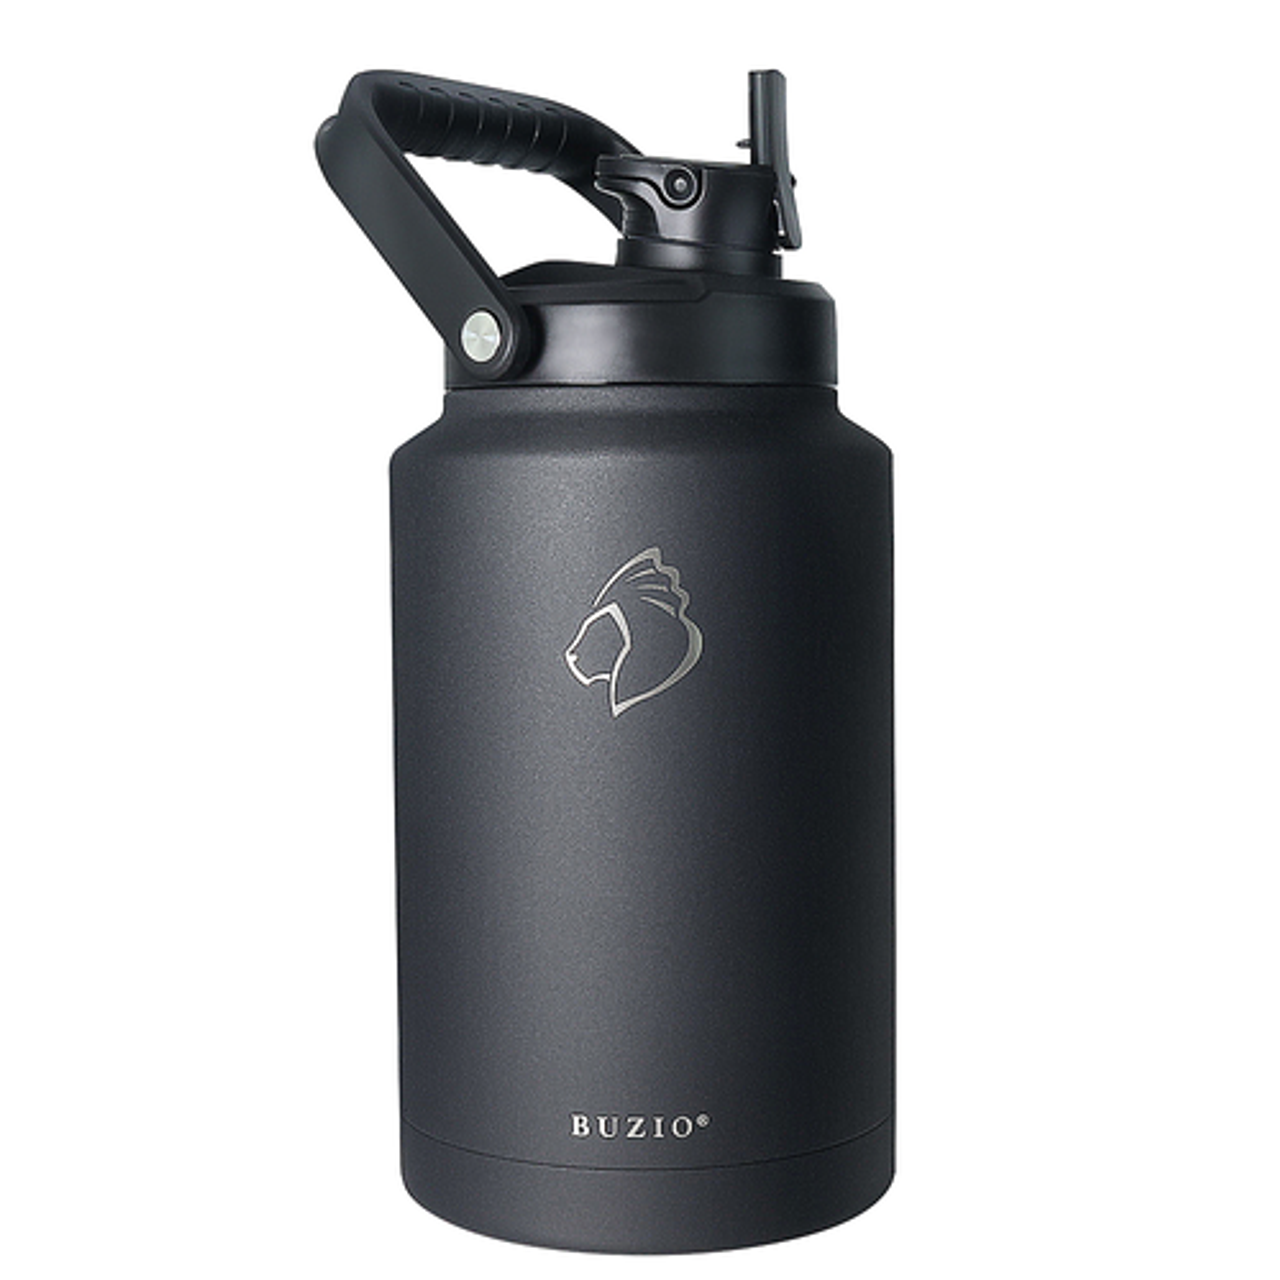 Buzio - Rock Series Insulated Water Bottle Growler with 2 Stainless Cups and Straw Lid 128oz - Black